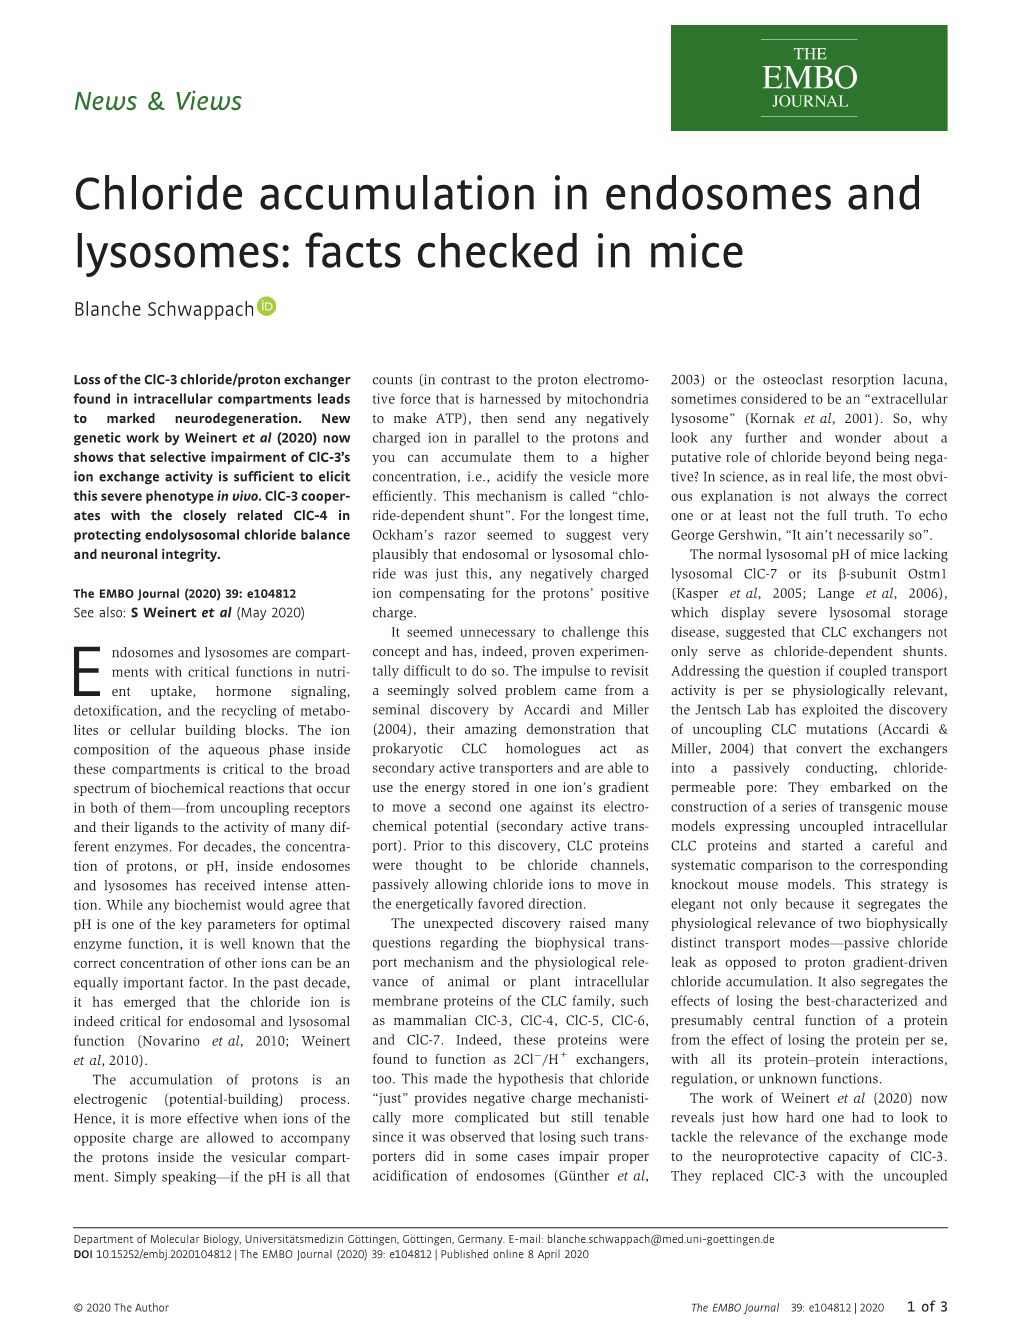 Chloride Accumulation in Endosomes and Lysosomes: Facts Checked in Mice